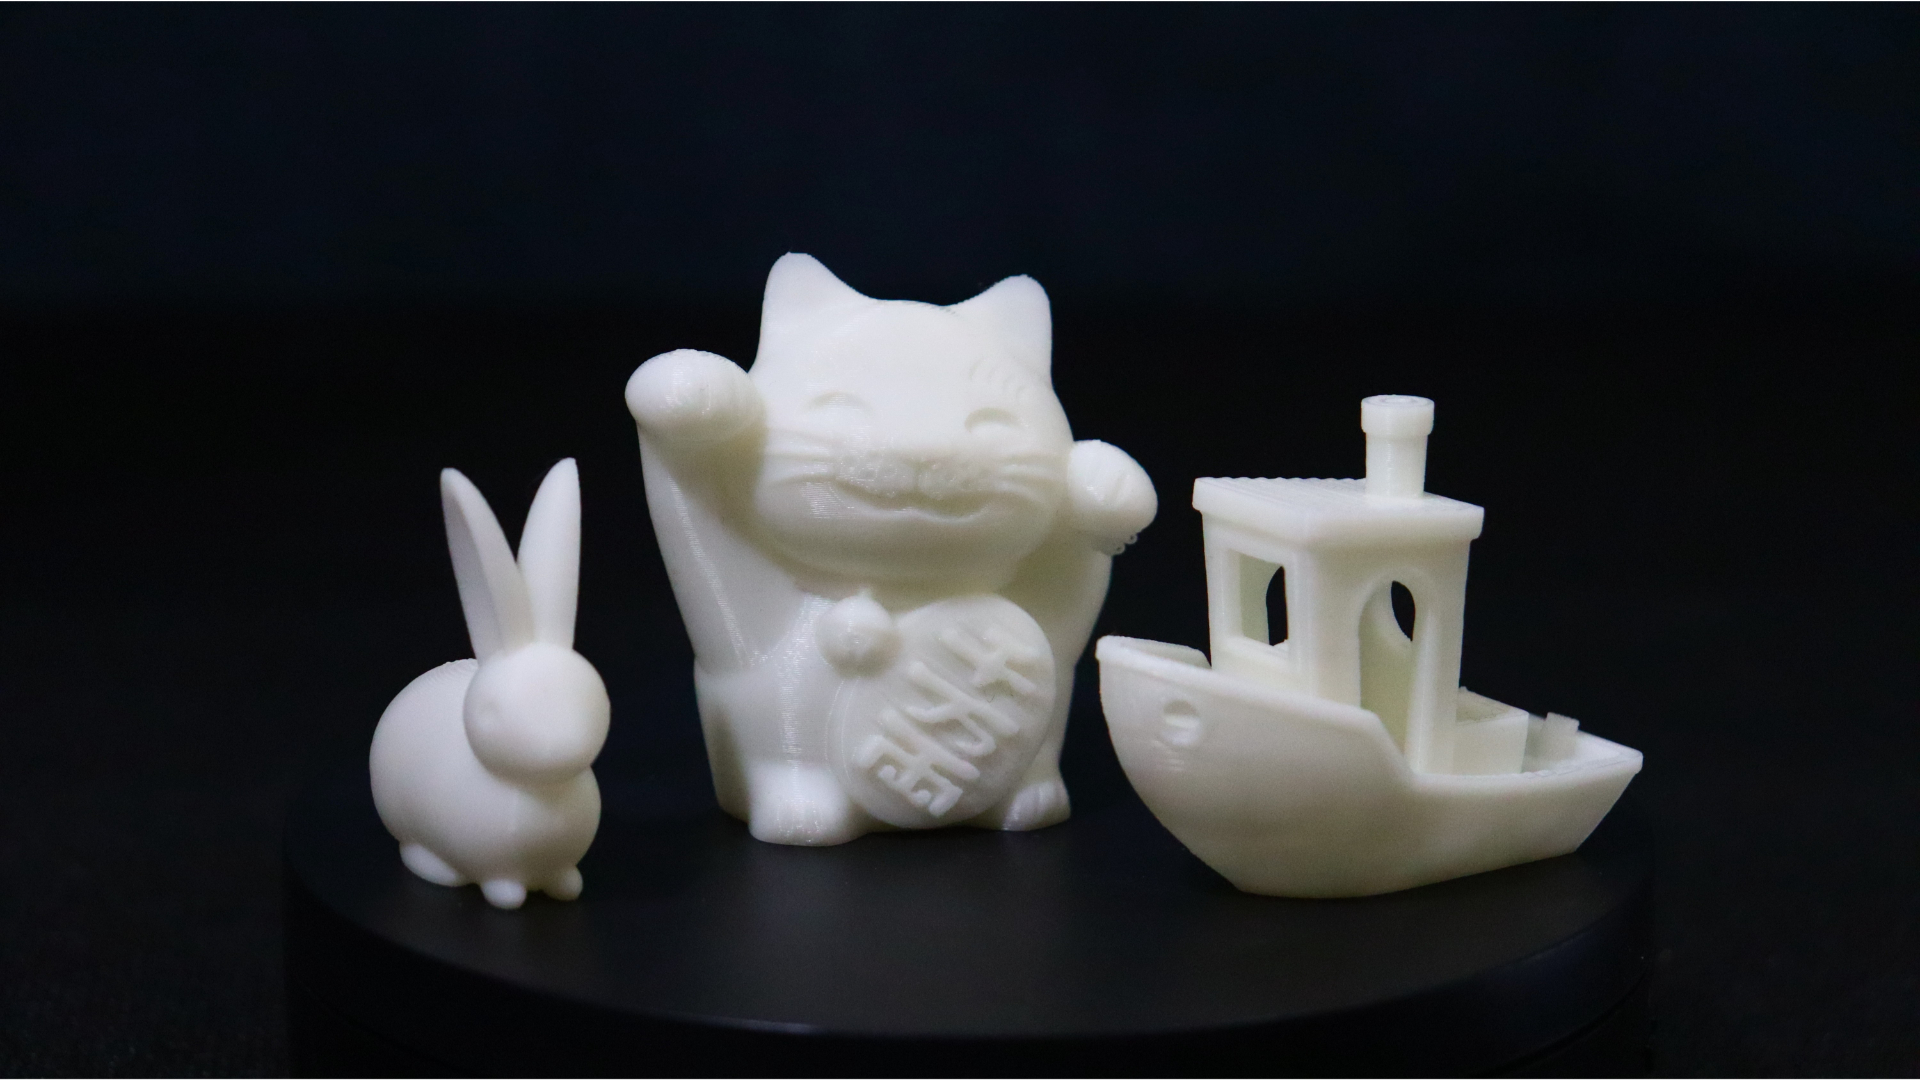 Three test prints from the Creality Ender 5 S1 - a rabbit, a lucky cat, and a benchy boat.